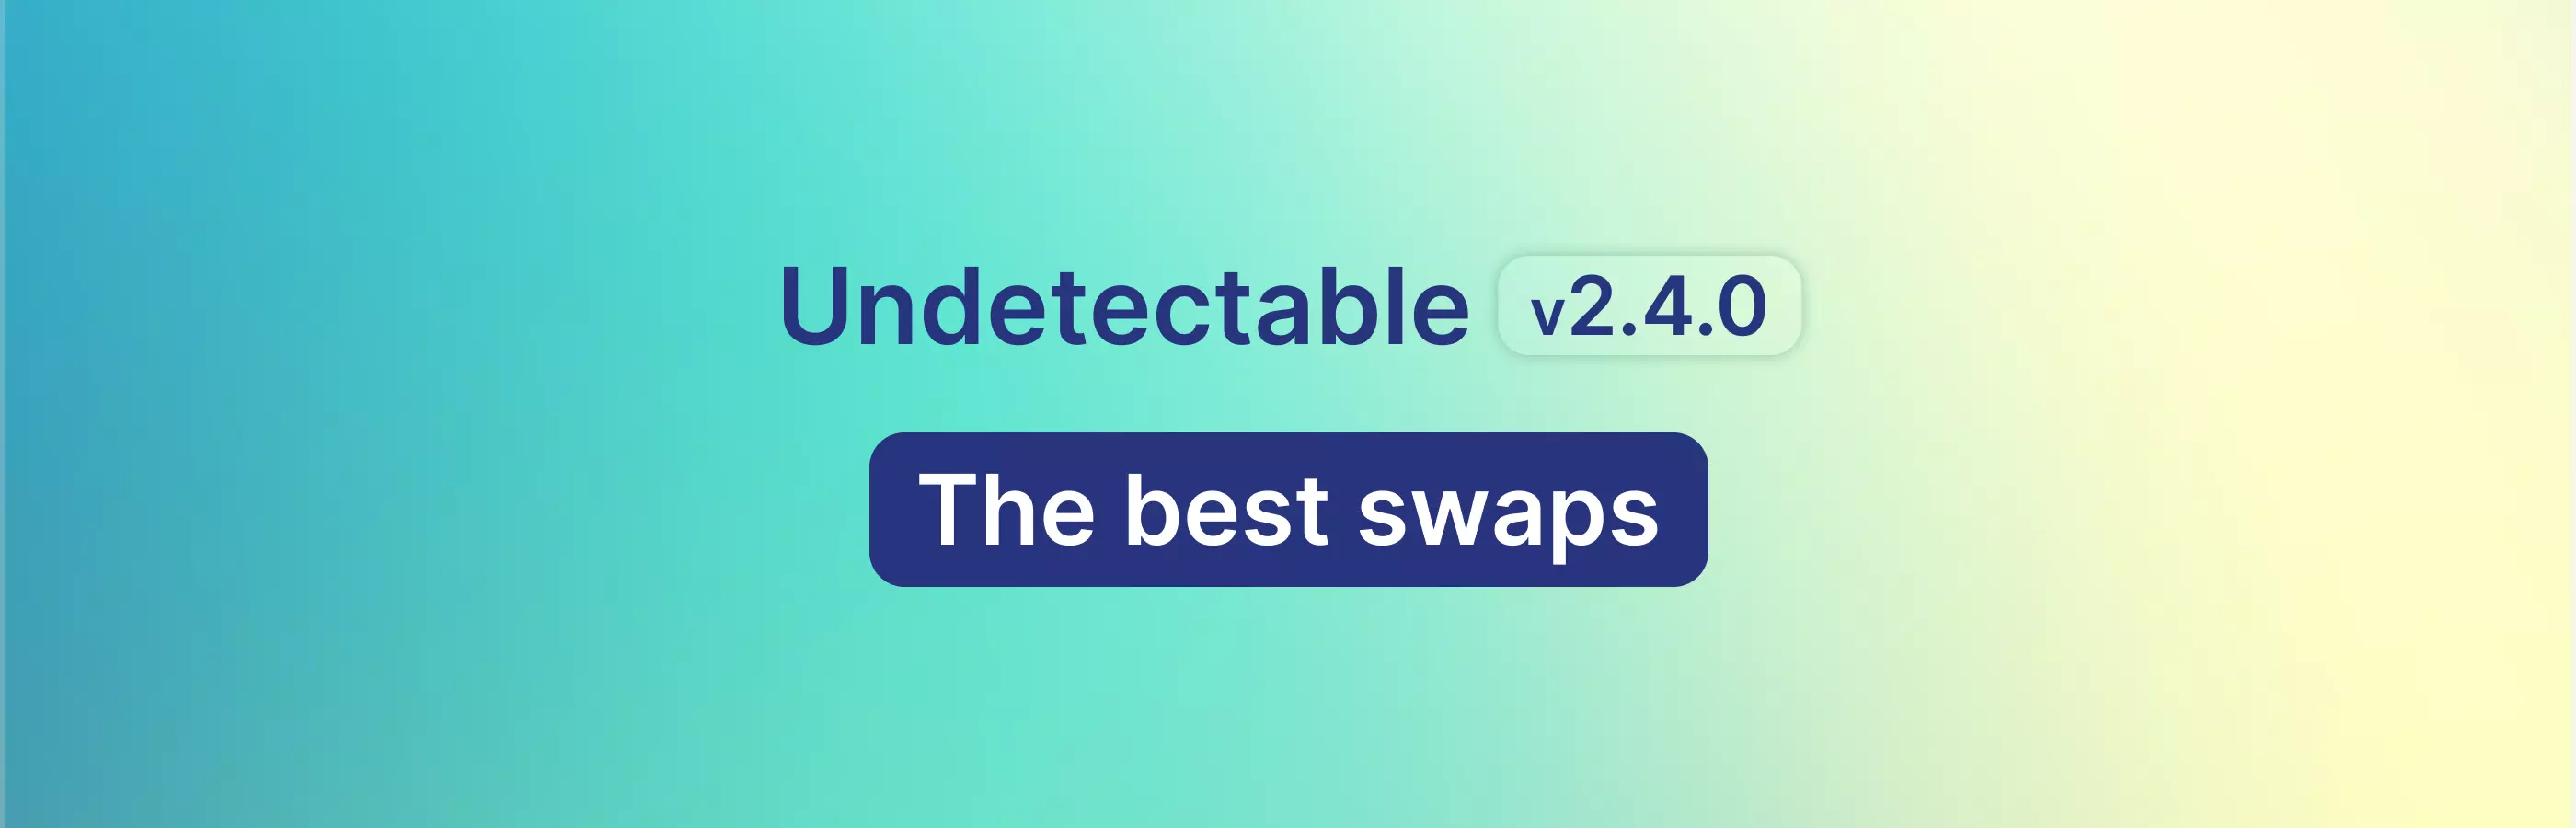 Update Undetectable 2.4.0 - Best Spoofs